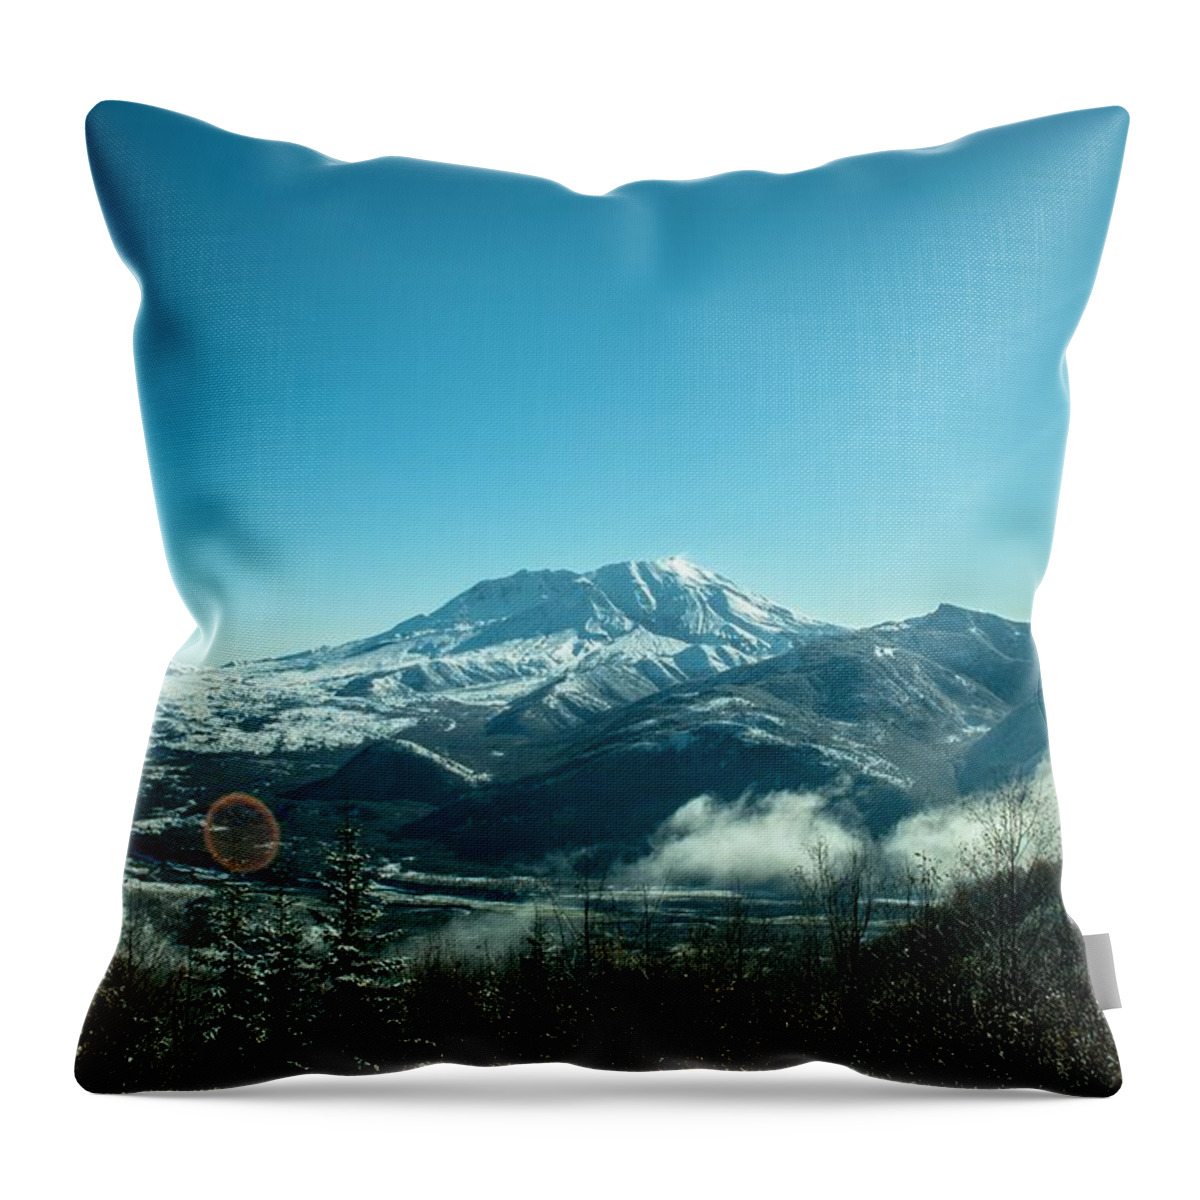 St Helens Throw Pillow featuring the photograph St Helens Big View by Troy Stapek